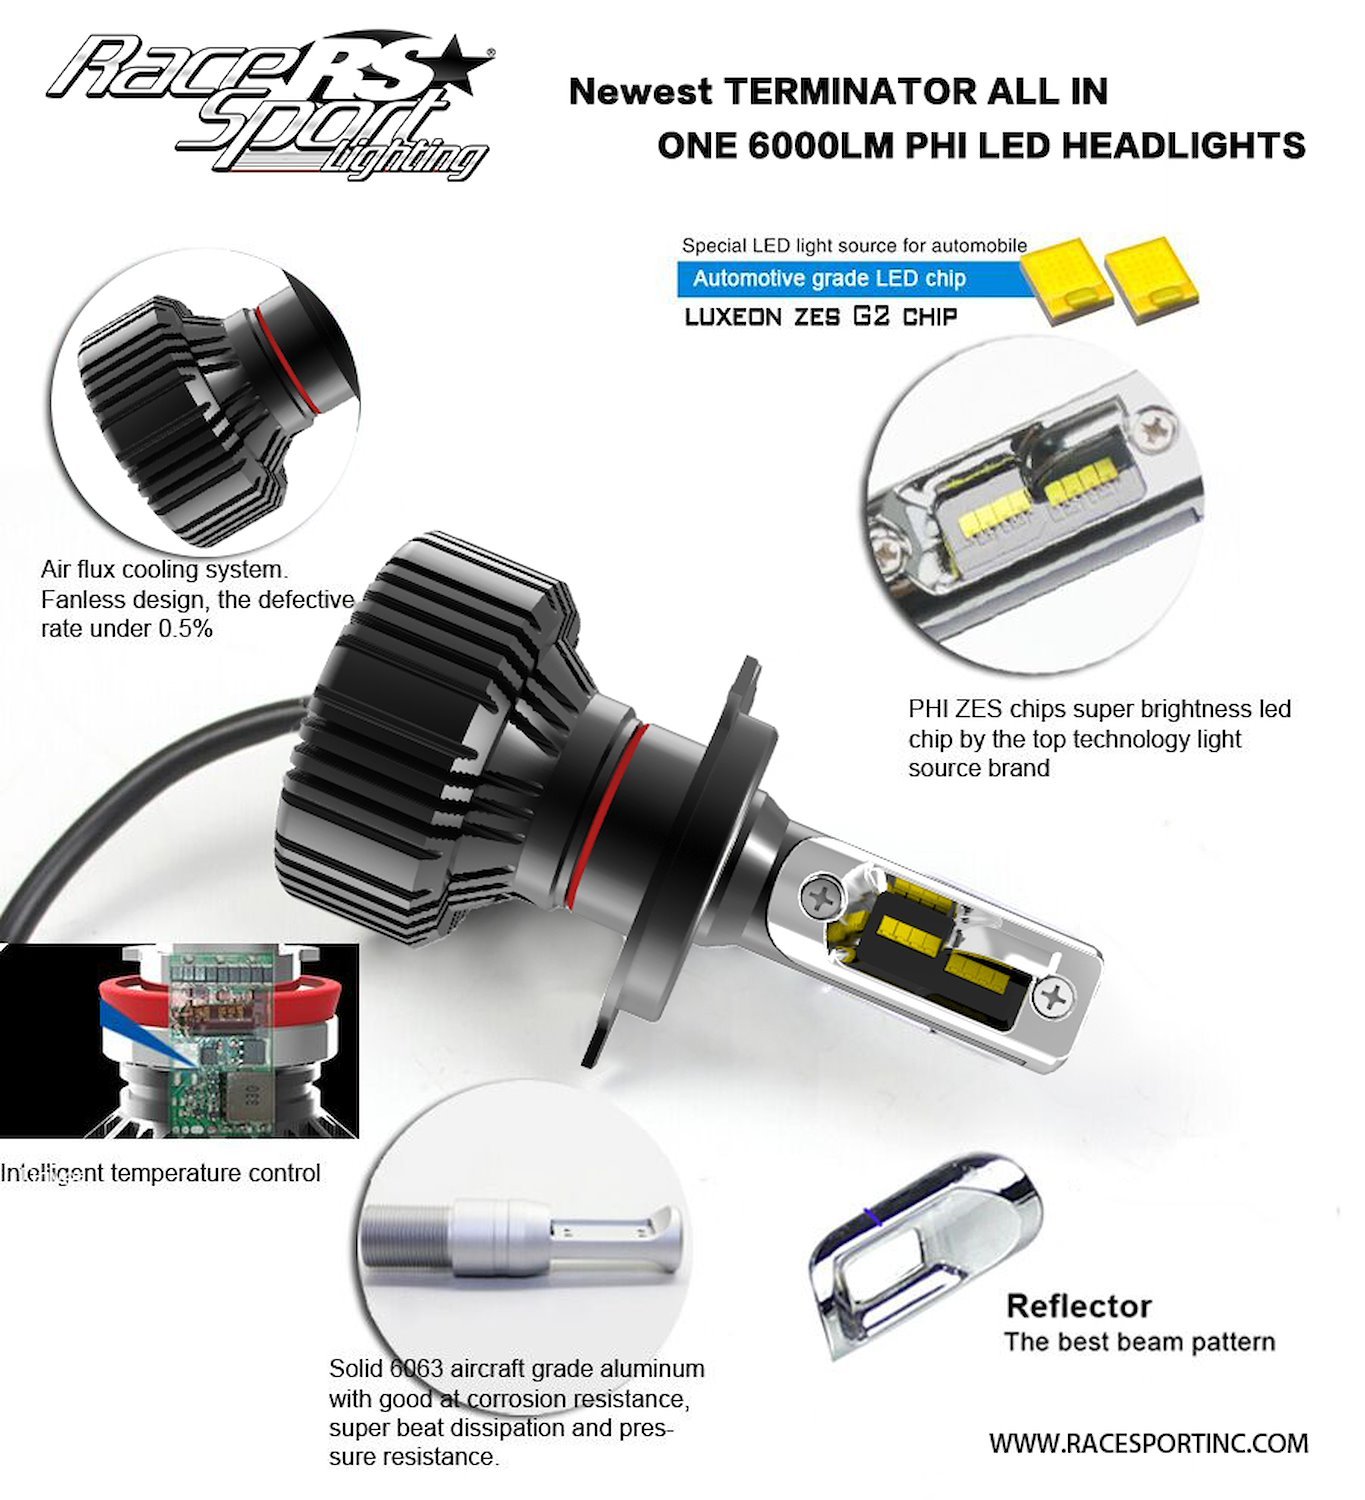 H4TLED Terminator-Series H4 Fan-less LED Conversion HeadLight Kit, w/ Pin Point Projection Optical Aims & Shallow Mount Design